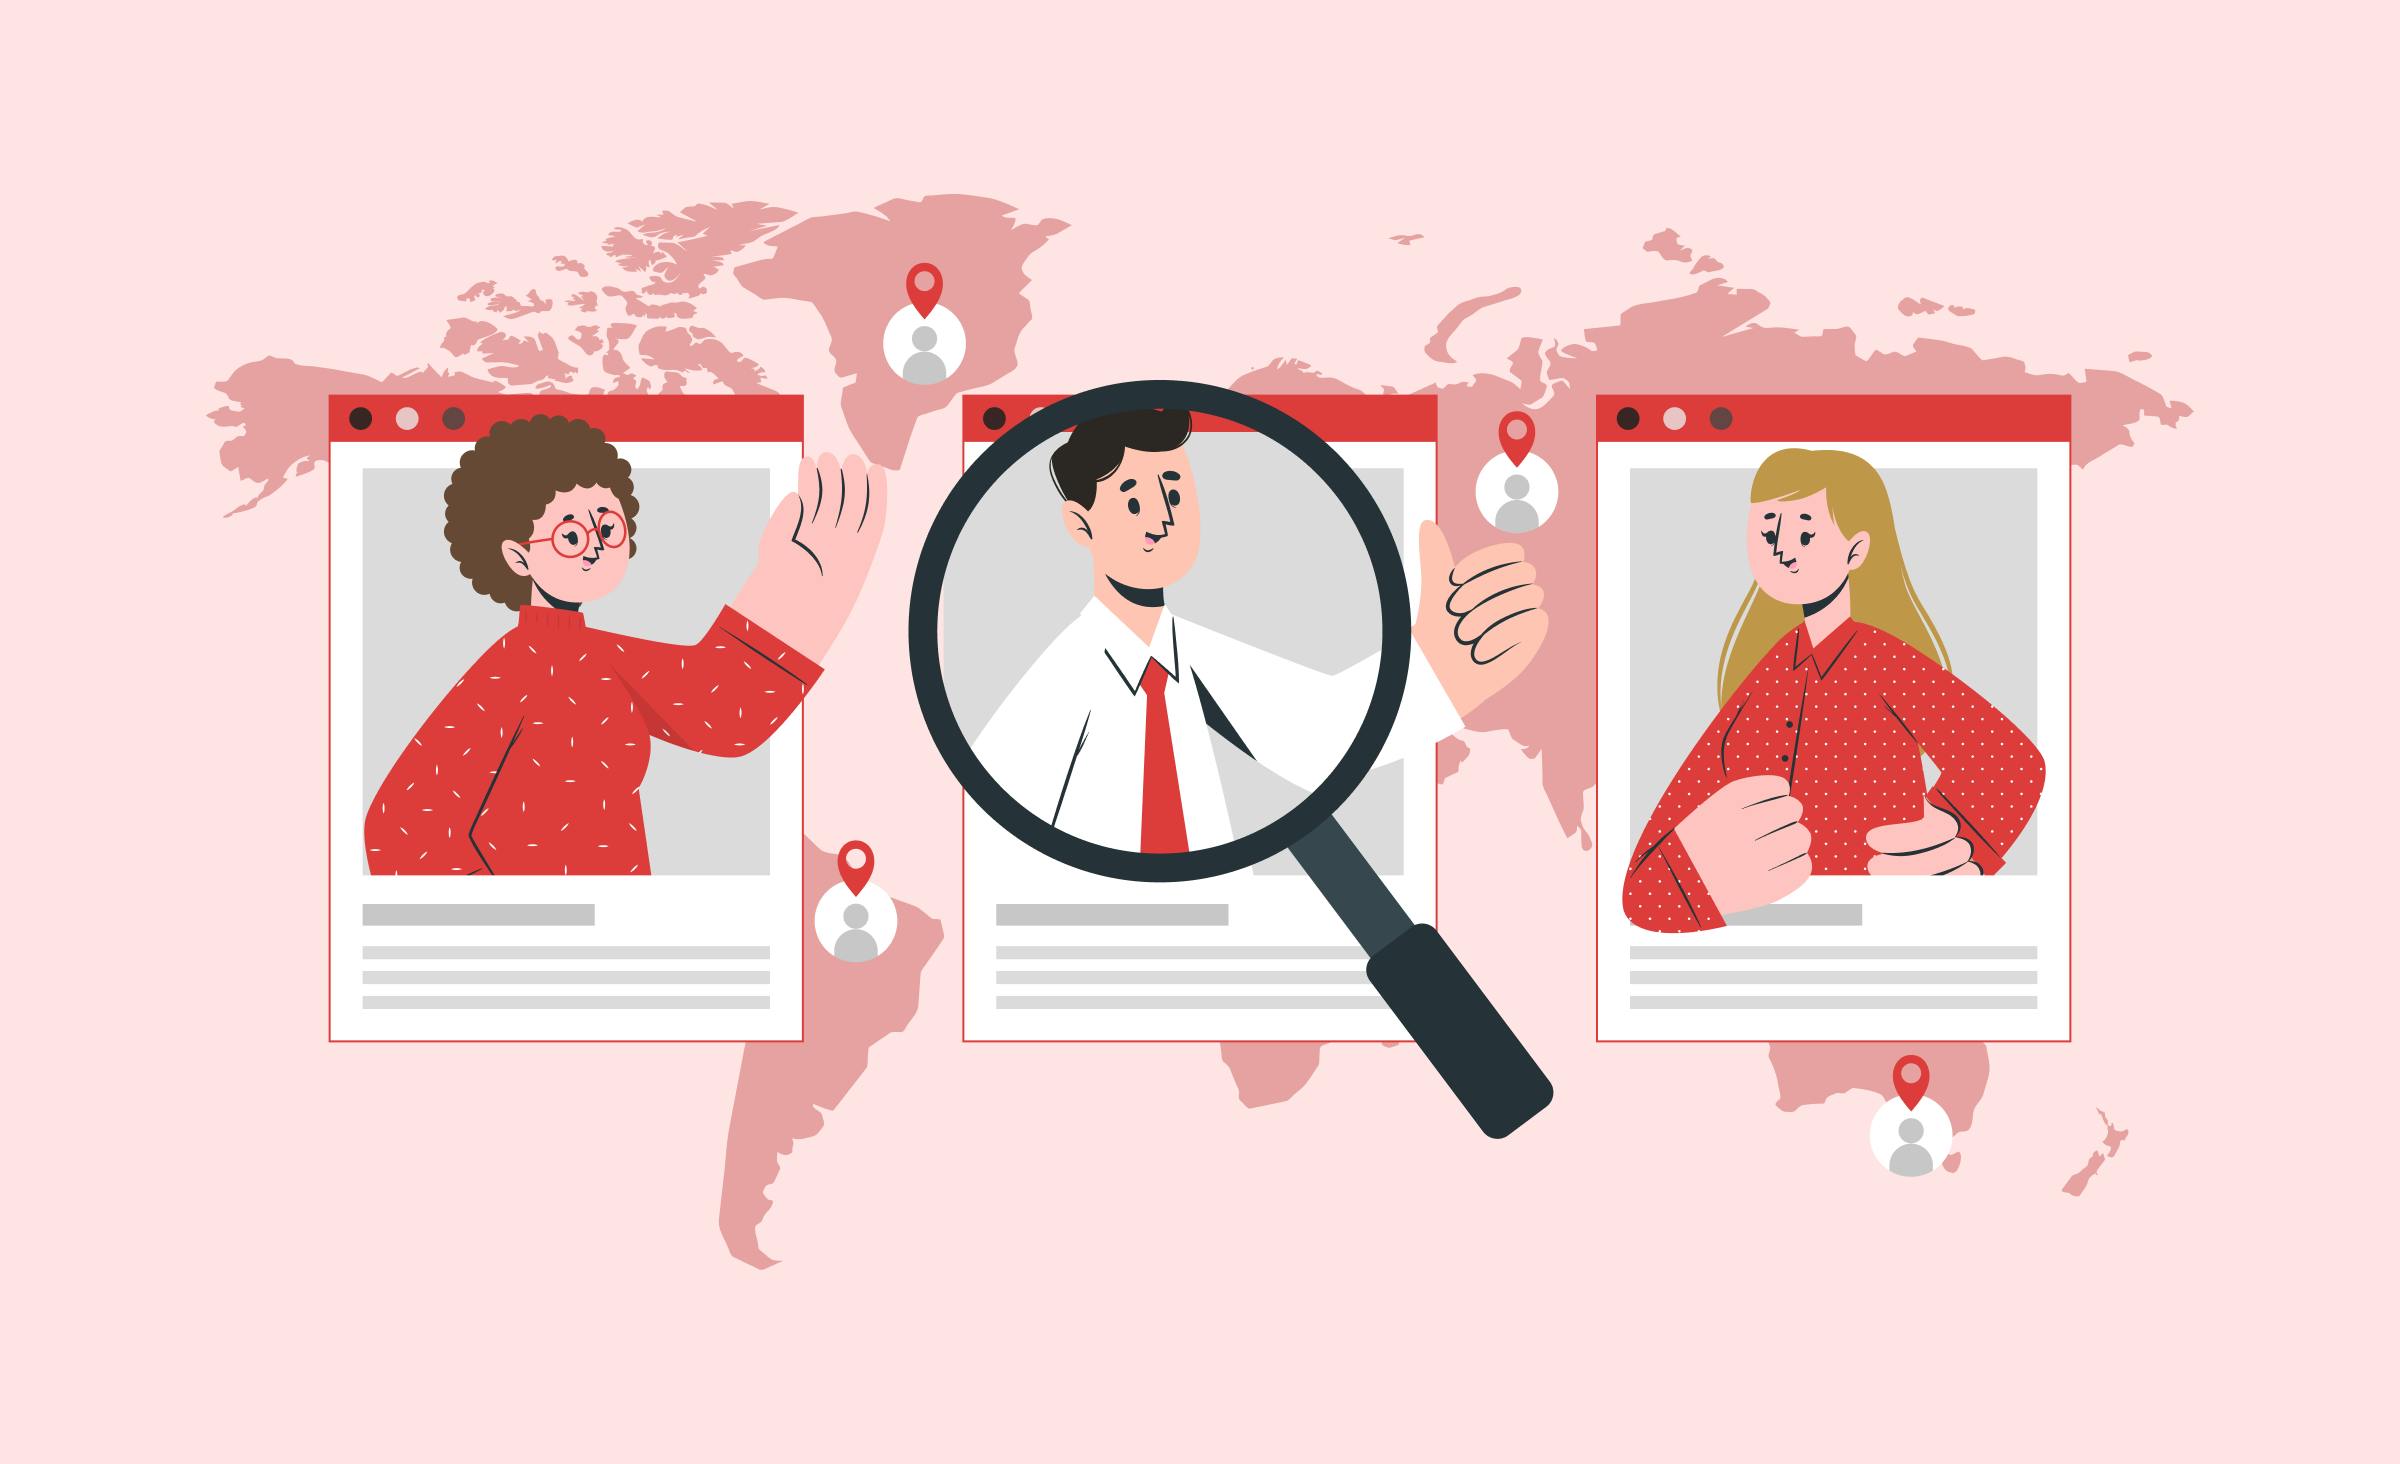 The cover represents the purpose of the article, providing guidance on selecting a software development company. It features a map with pinned profiles depicting various company representatives. Three profiles are zoomed in: one shows a woman with curly brown hair, glasses, and a longsleeve; another shows a woman with long fair hair wearing a shirt; and the third shows a man in a shirt and tie. A magnifying glass is examining the man’s profile.